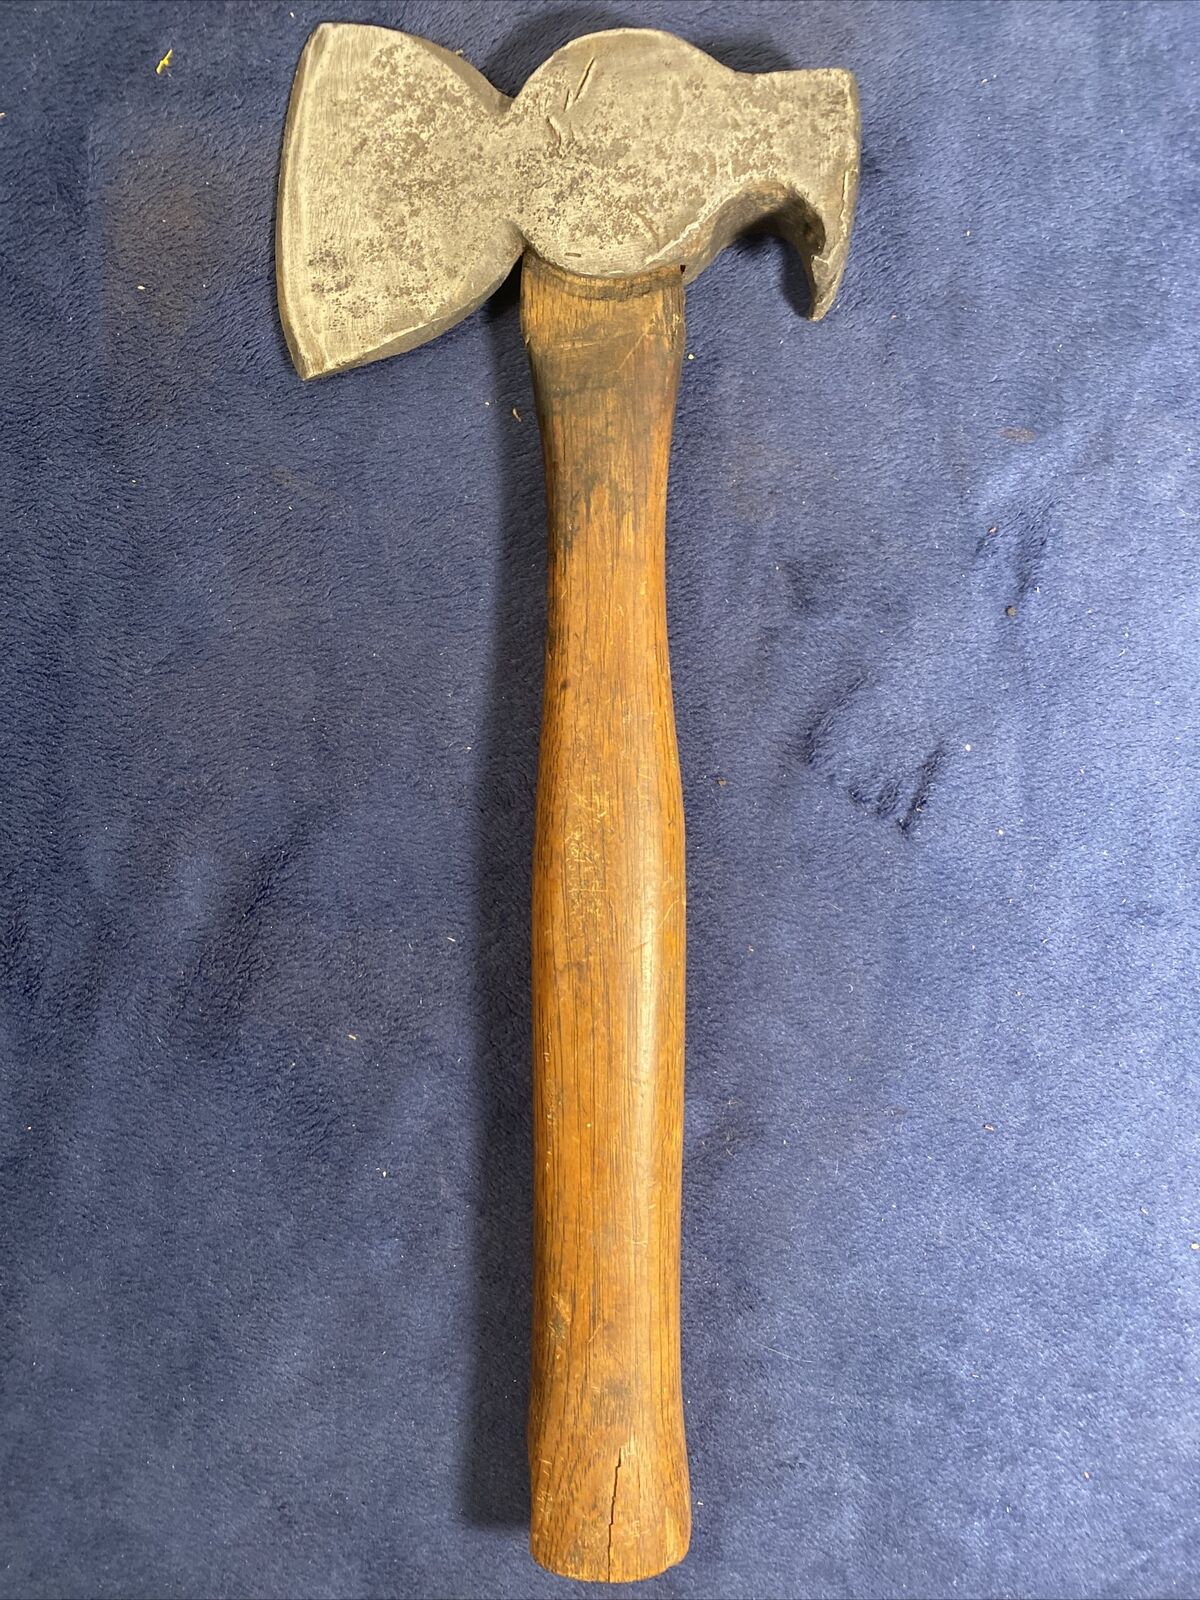 Possible WWII German Army Sapper's Axe.